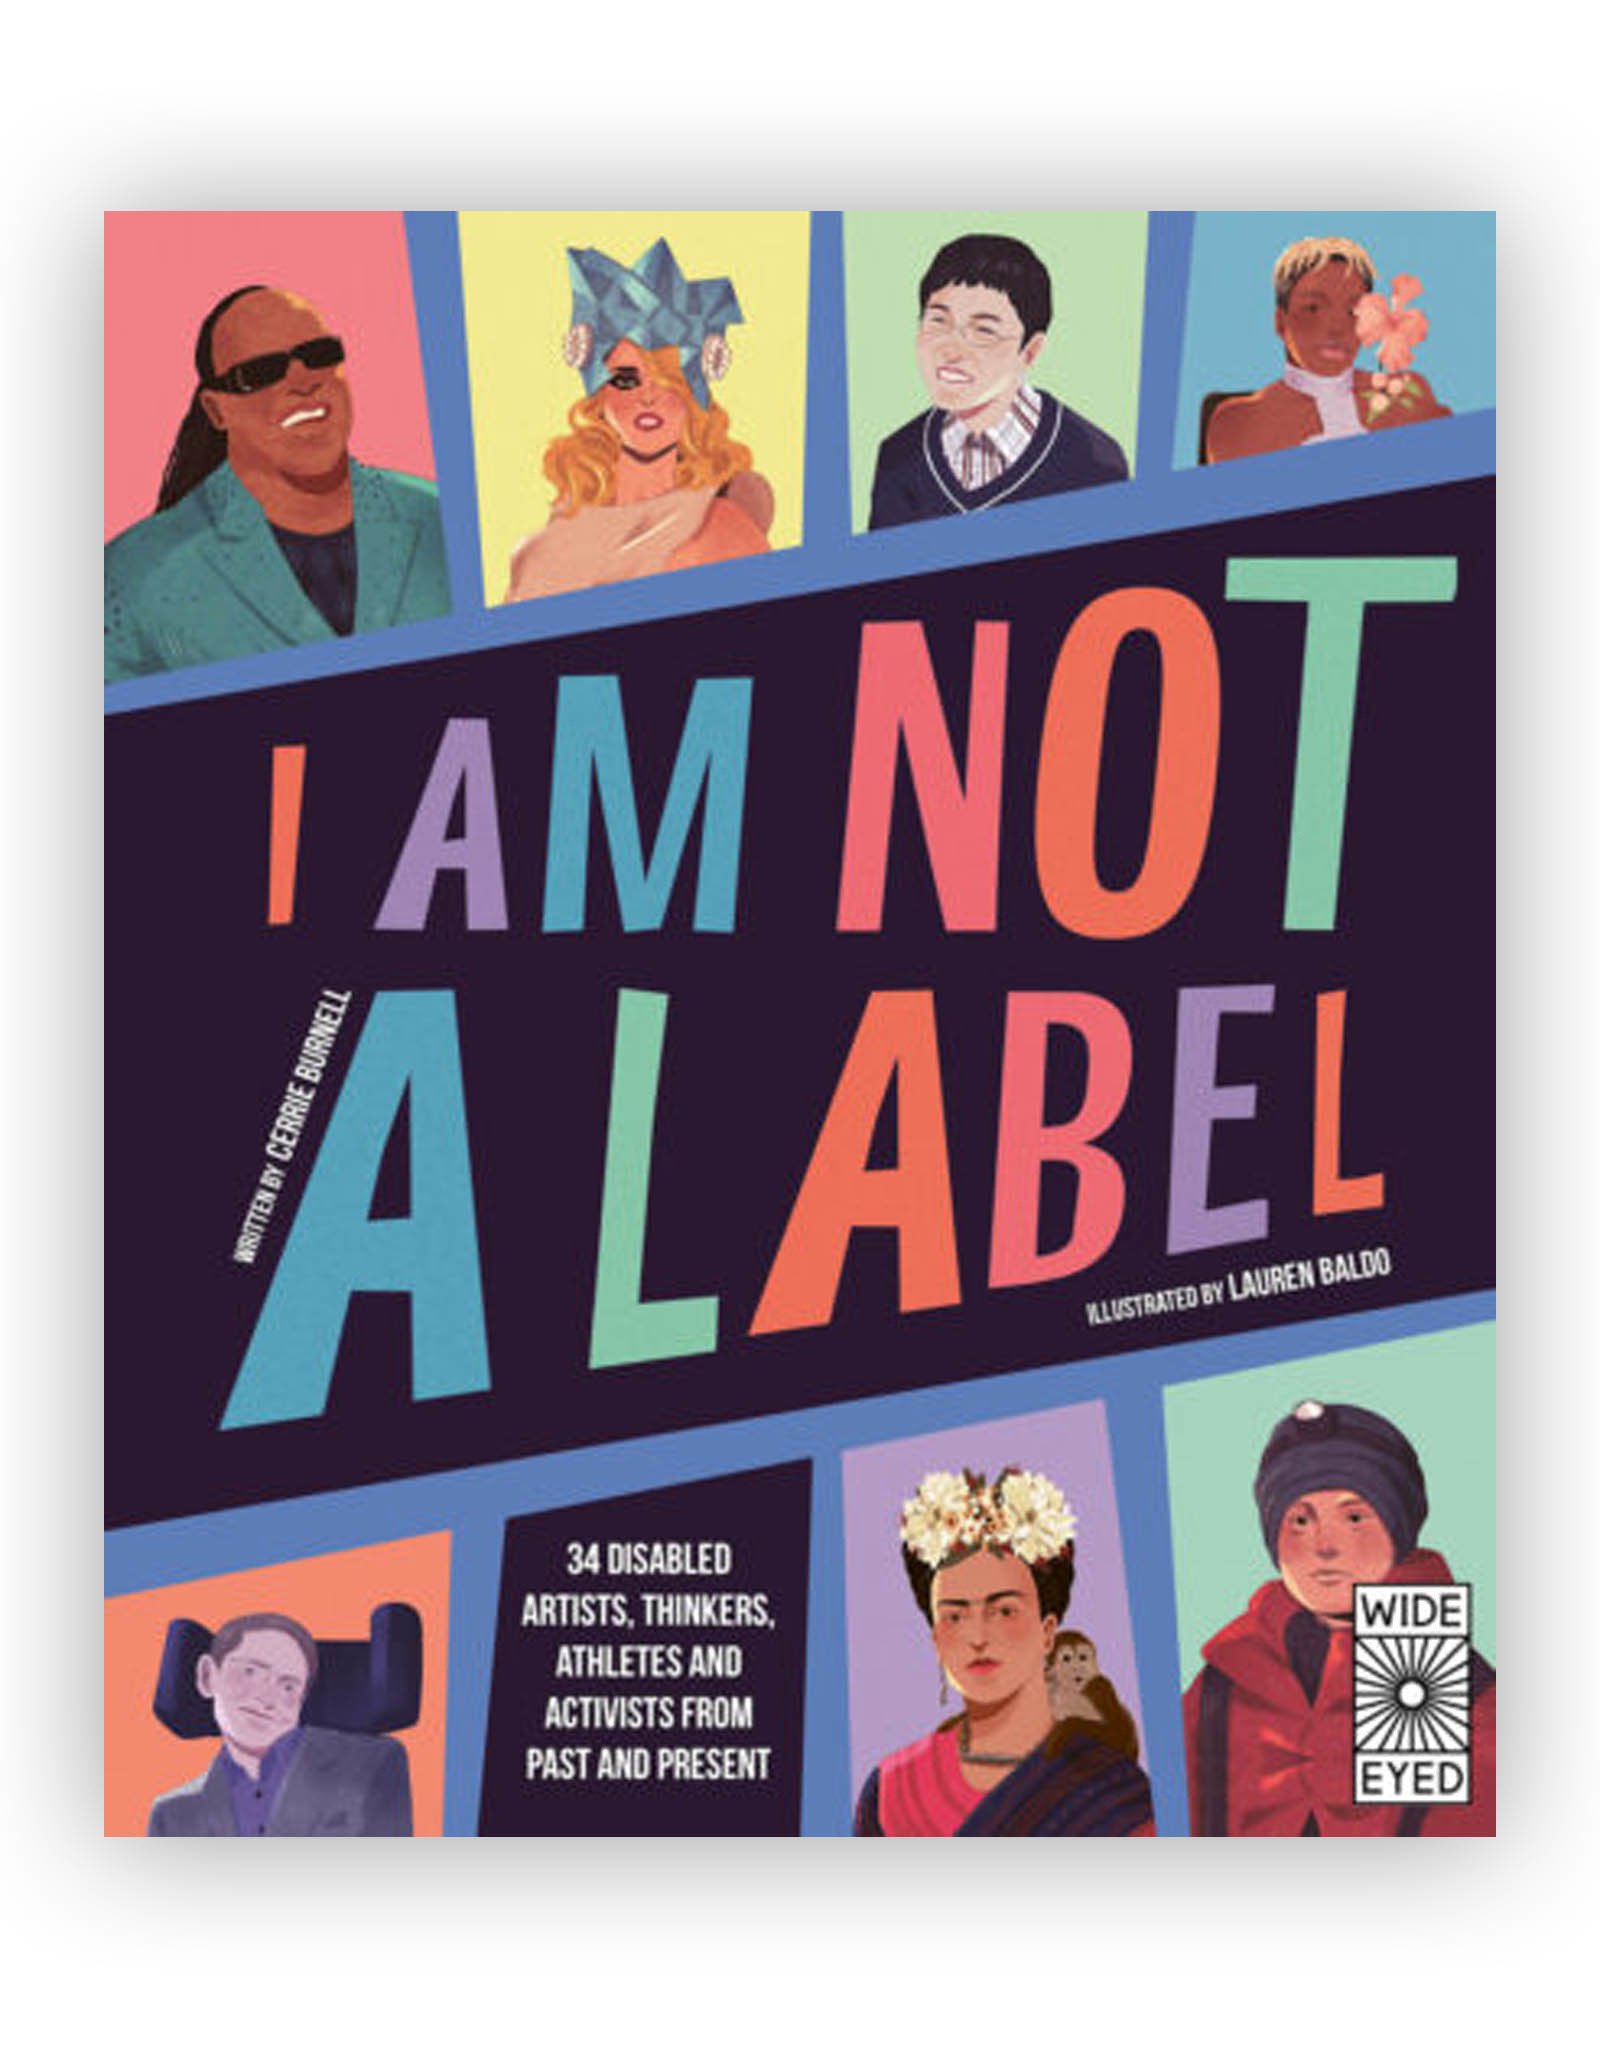 I Am Not A Label